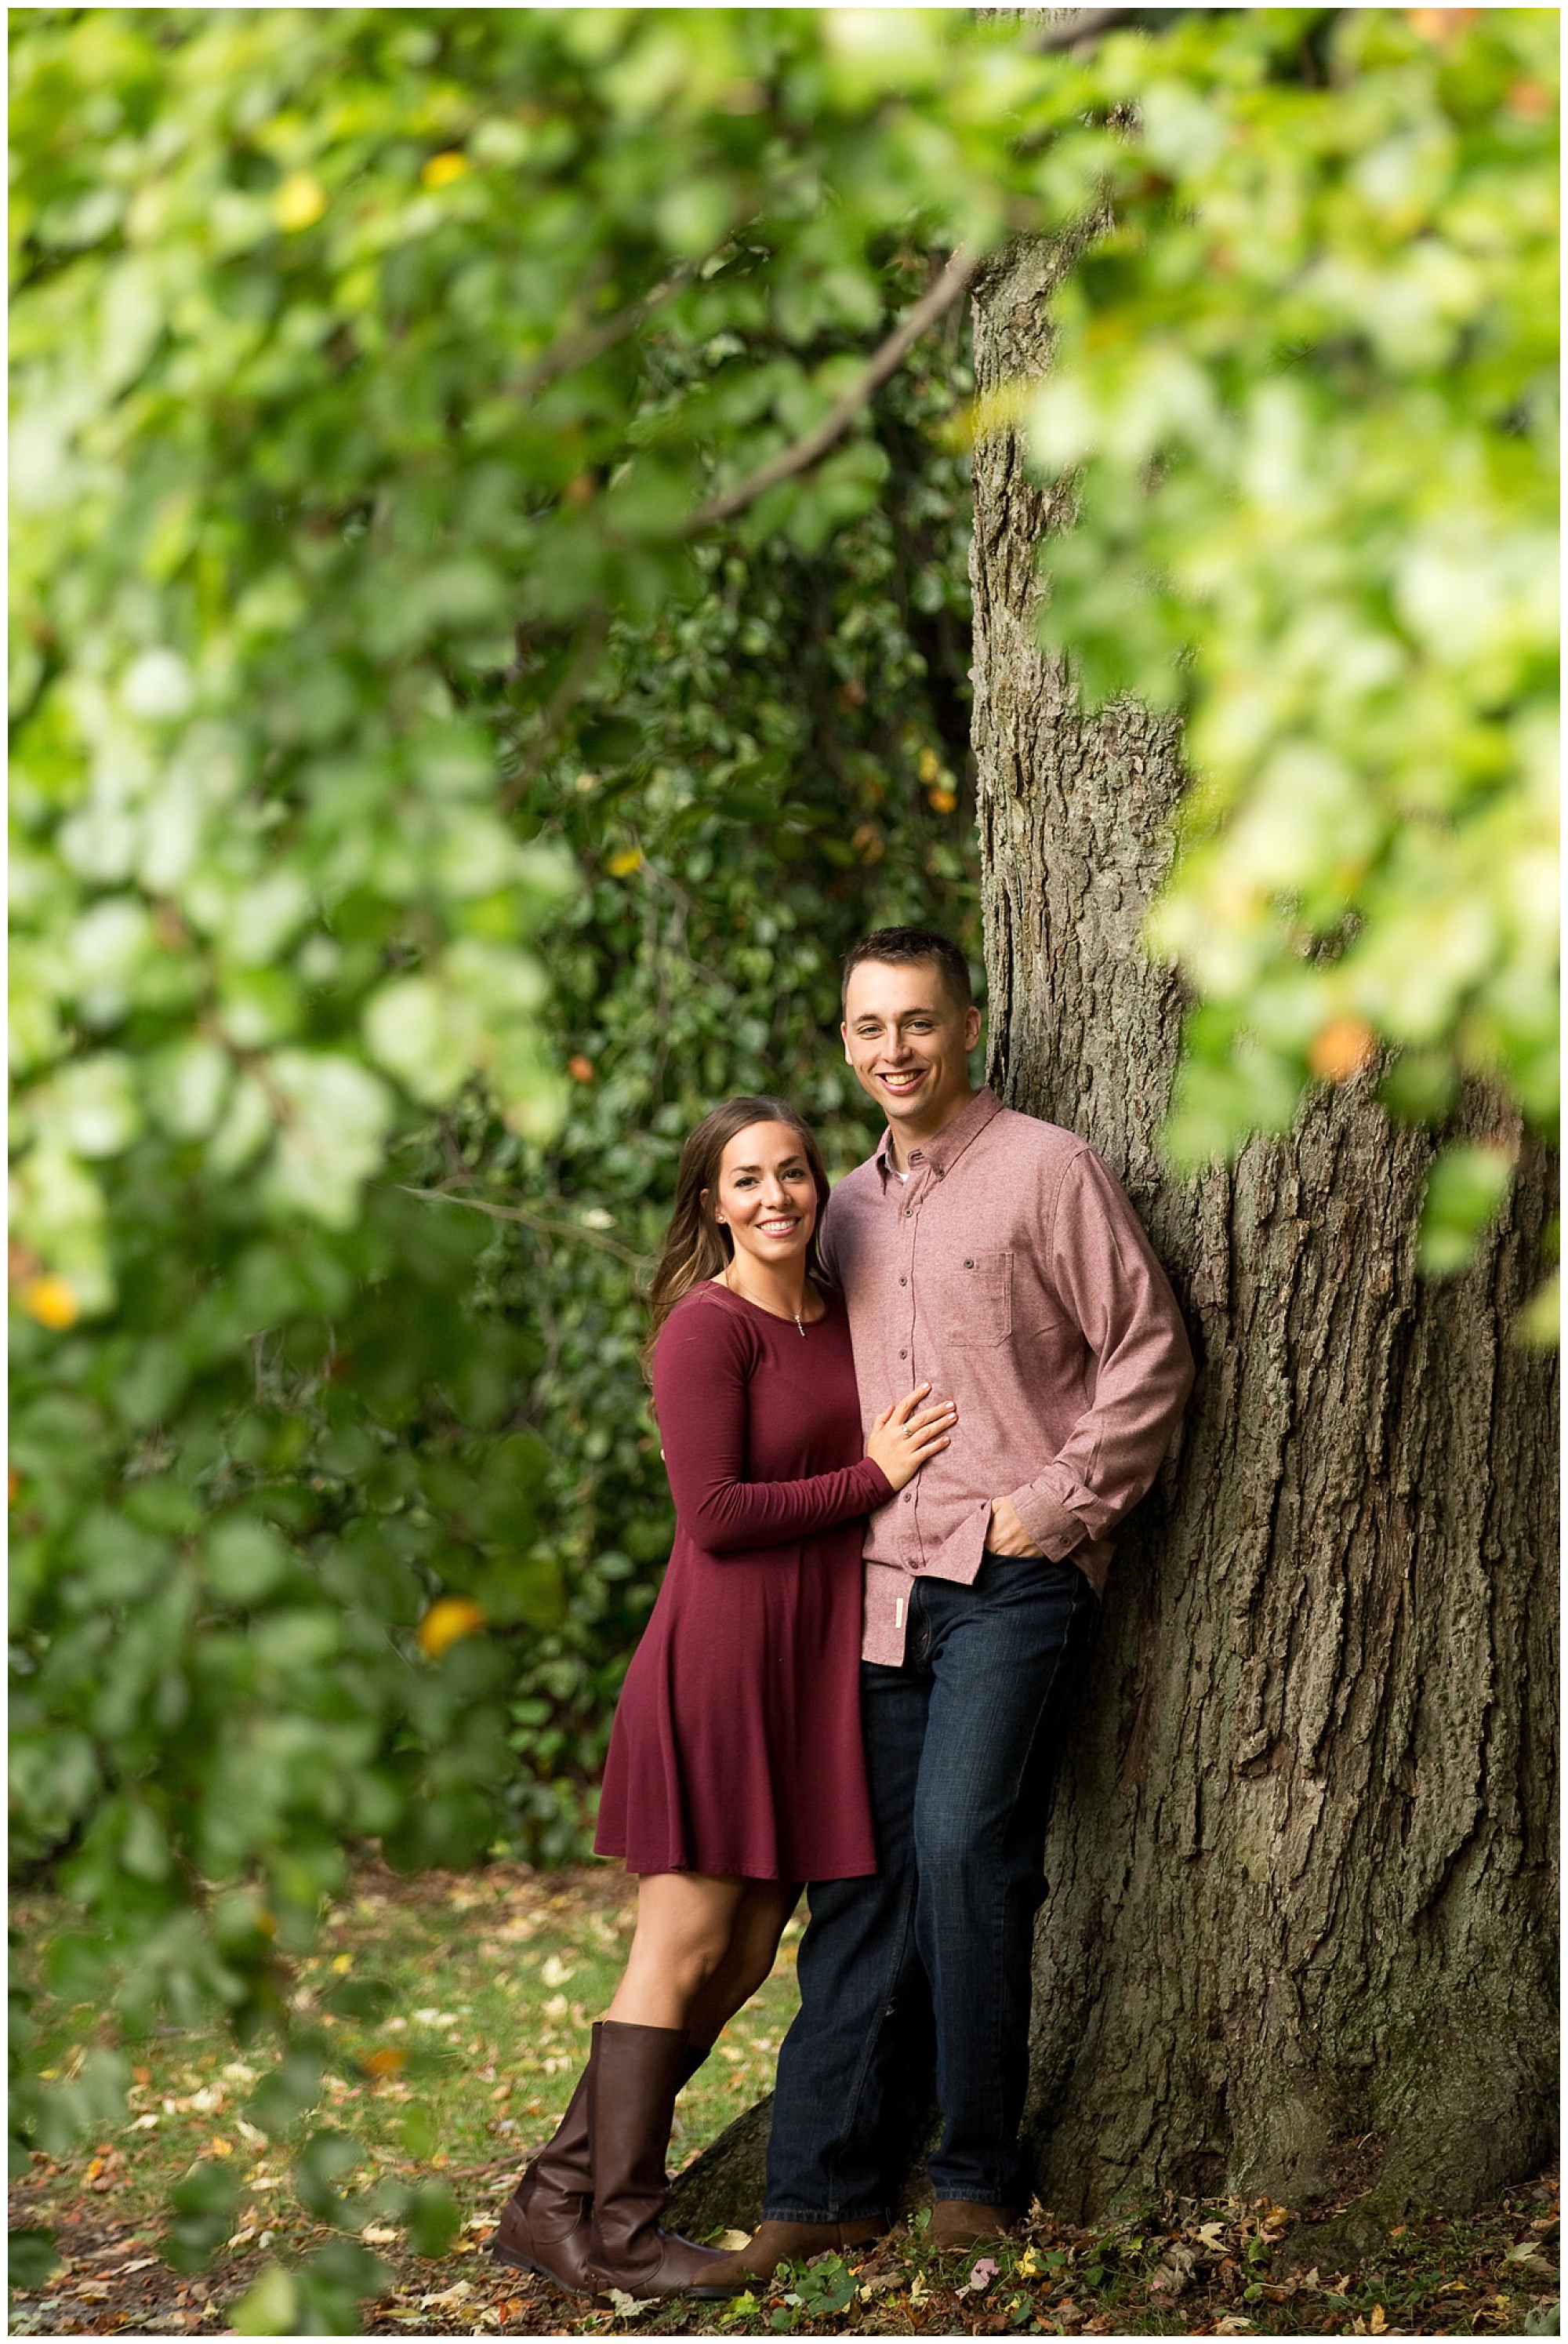 Photo of an engaged couple smiling at the camerea under a tree.